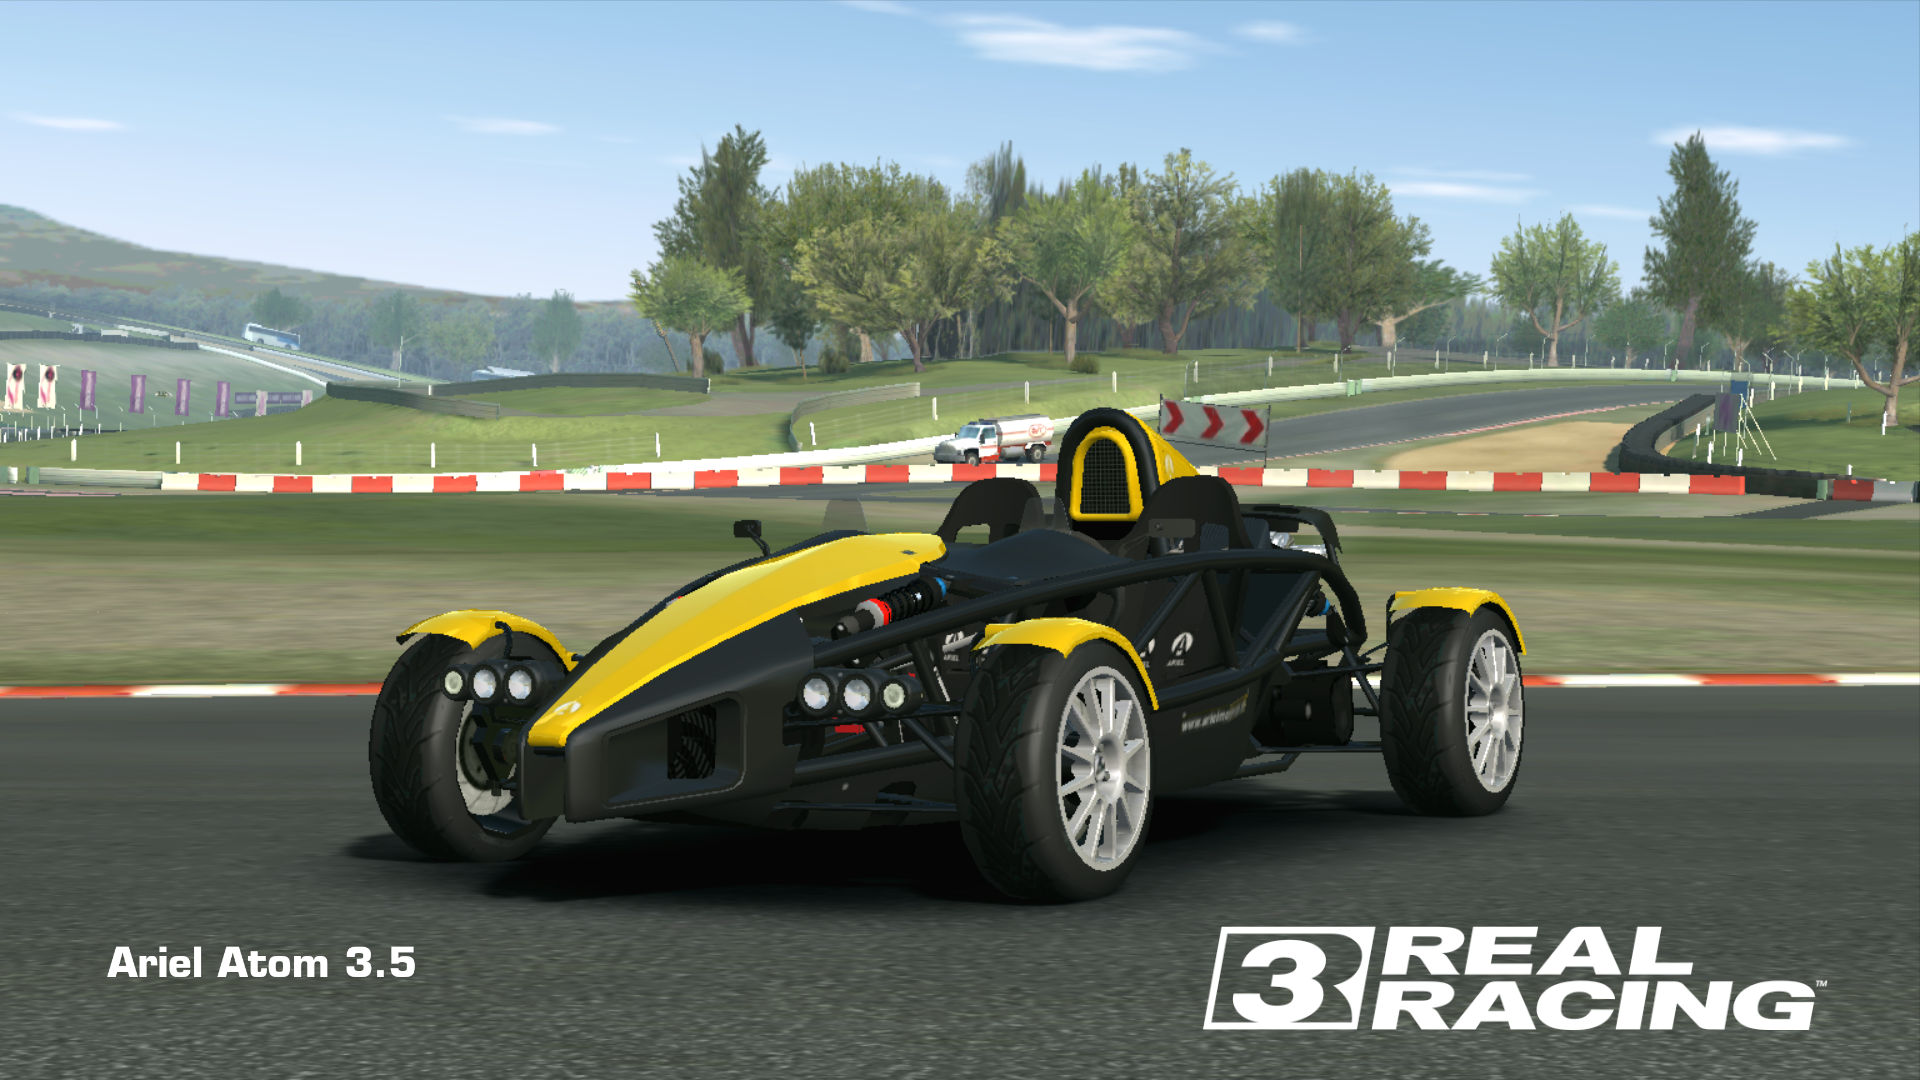 Cars (Fully Upgraded) | Real Racing 3 Wiki | Fandom powered by Wikia1920 x 1080